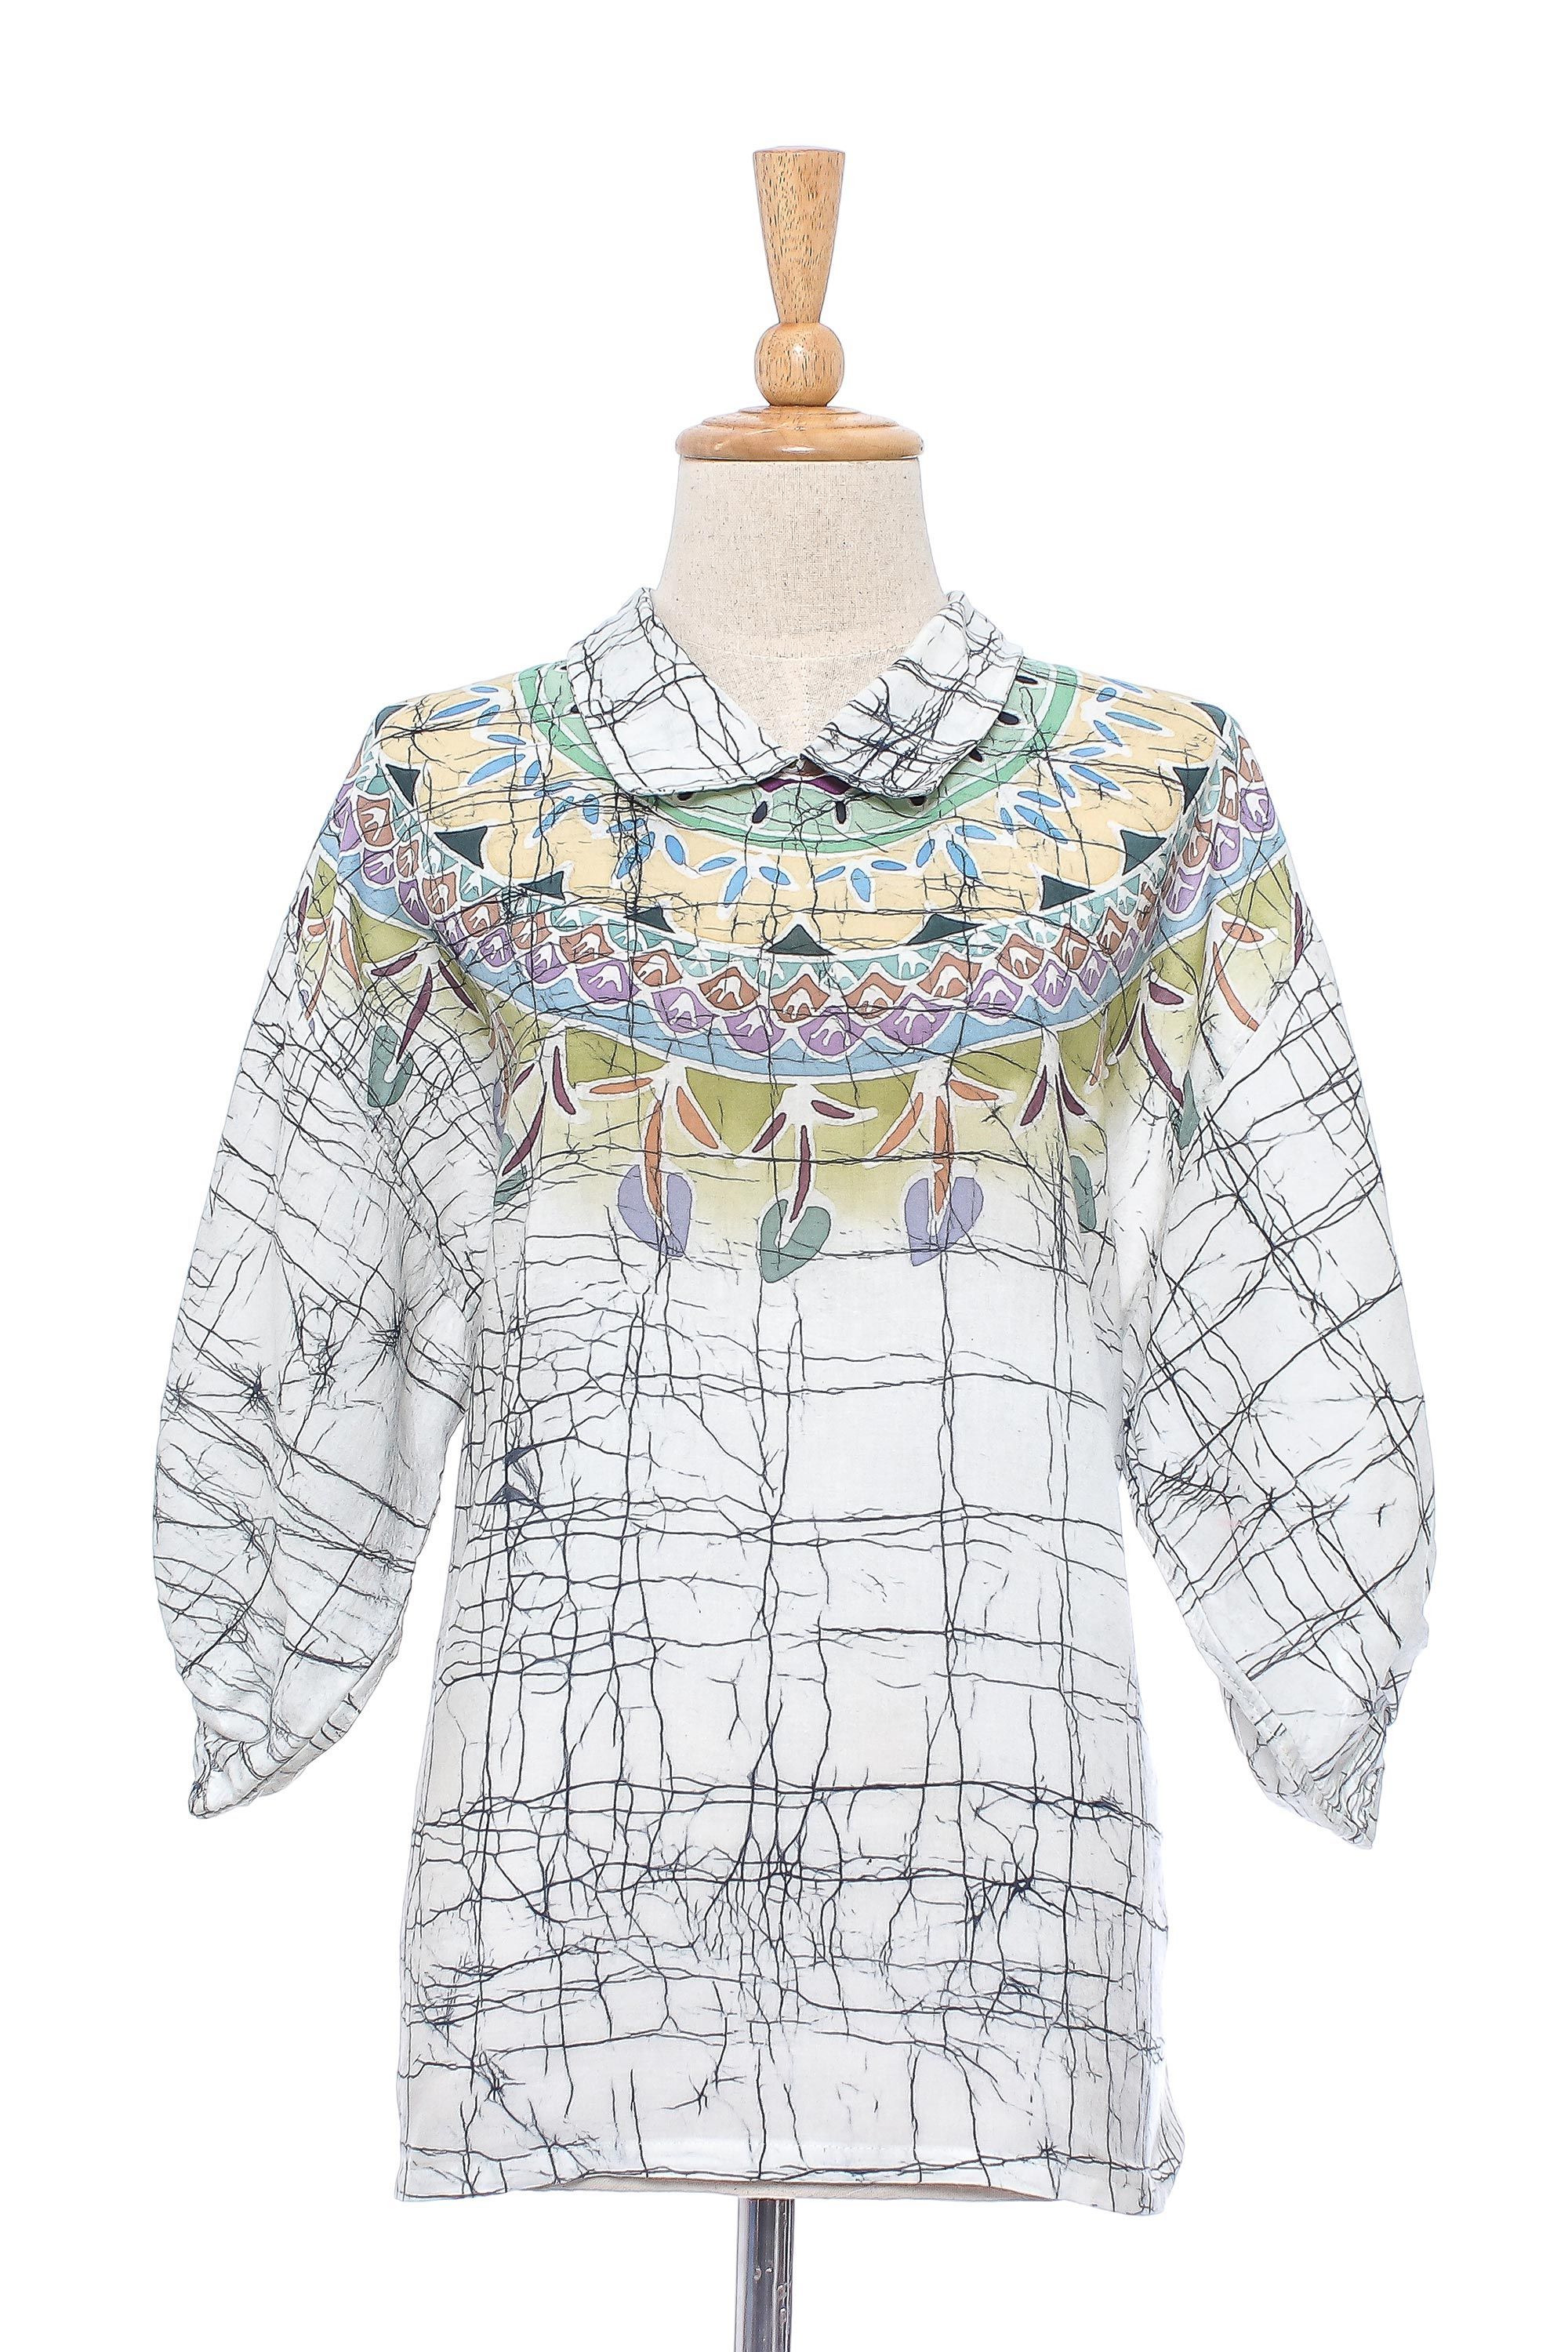 UNICEF Market | Cotton Batik Tunic Top with Colorful Designs from ...